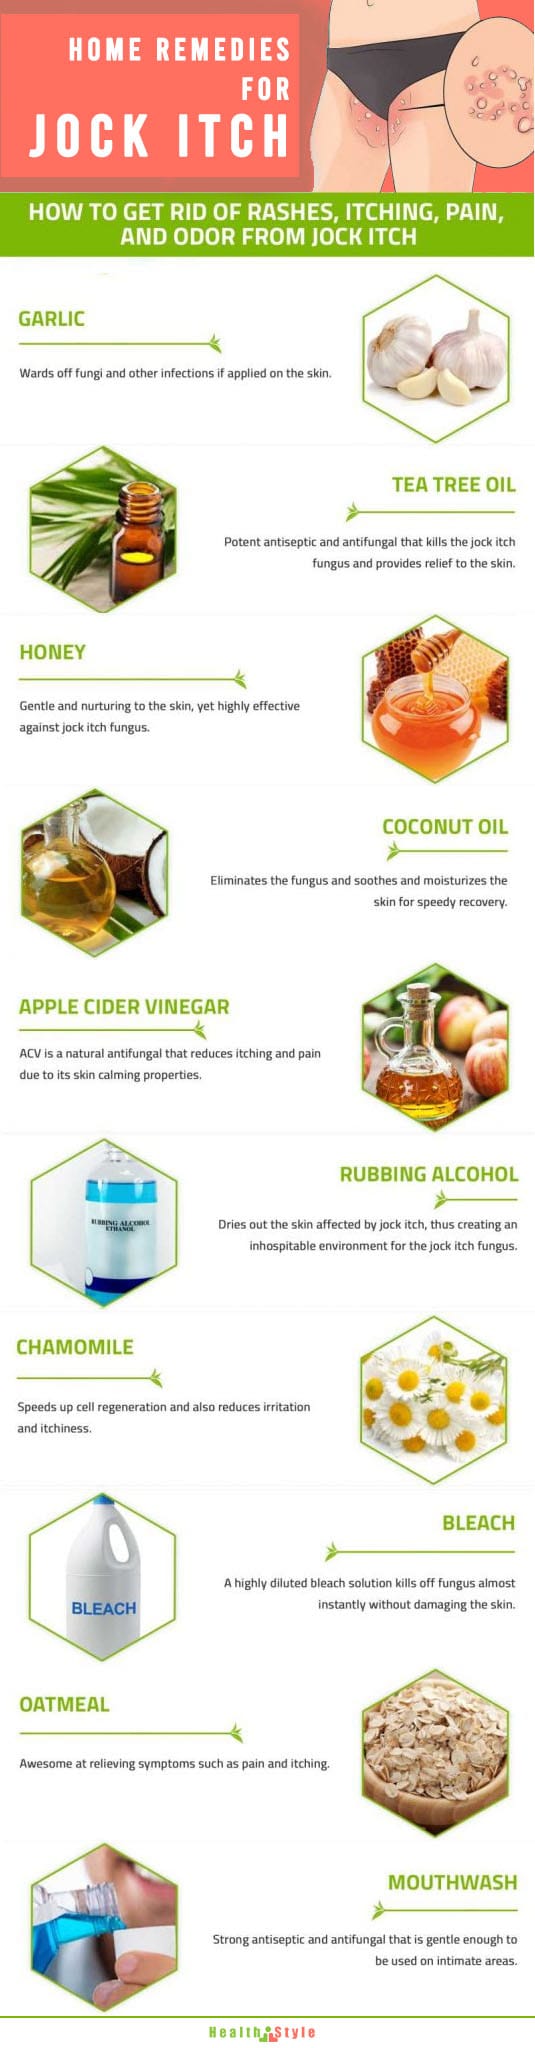 Home Remedies for Jock Itch Infographic